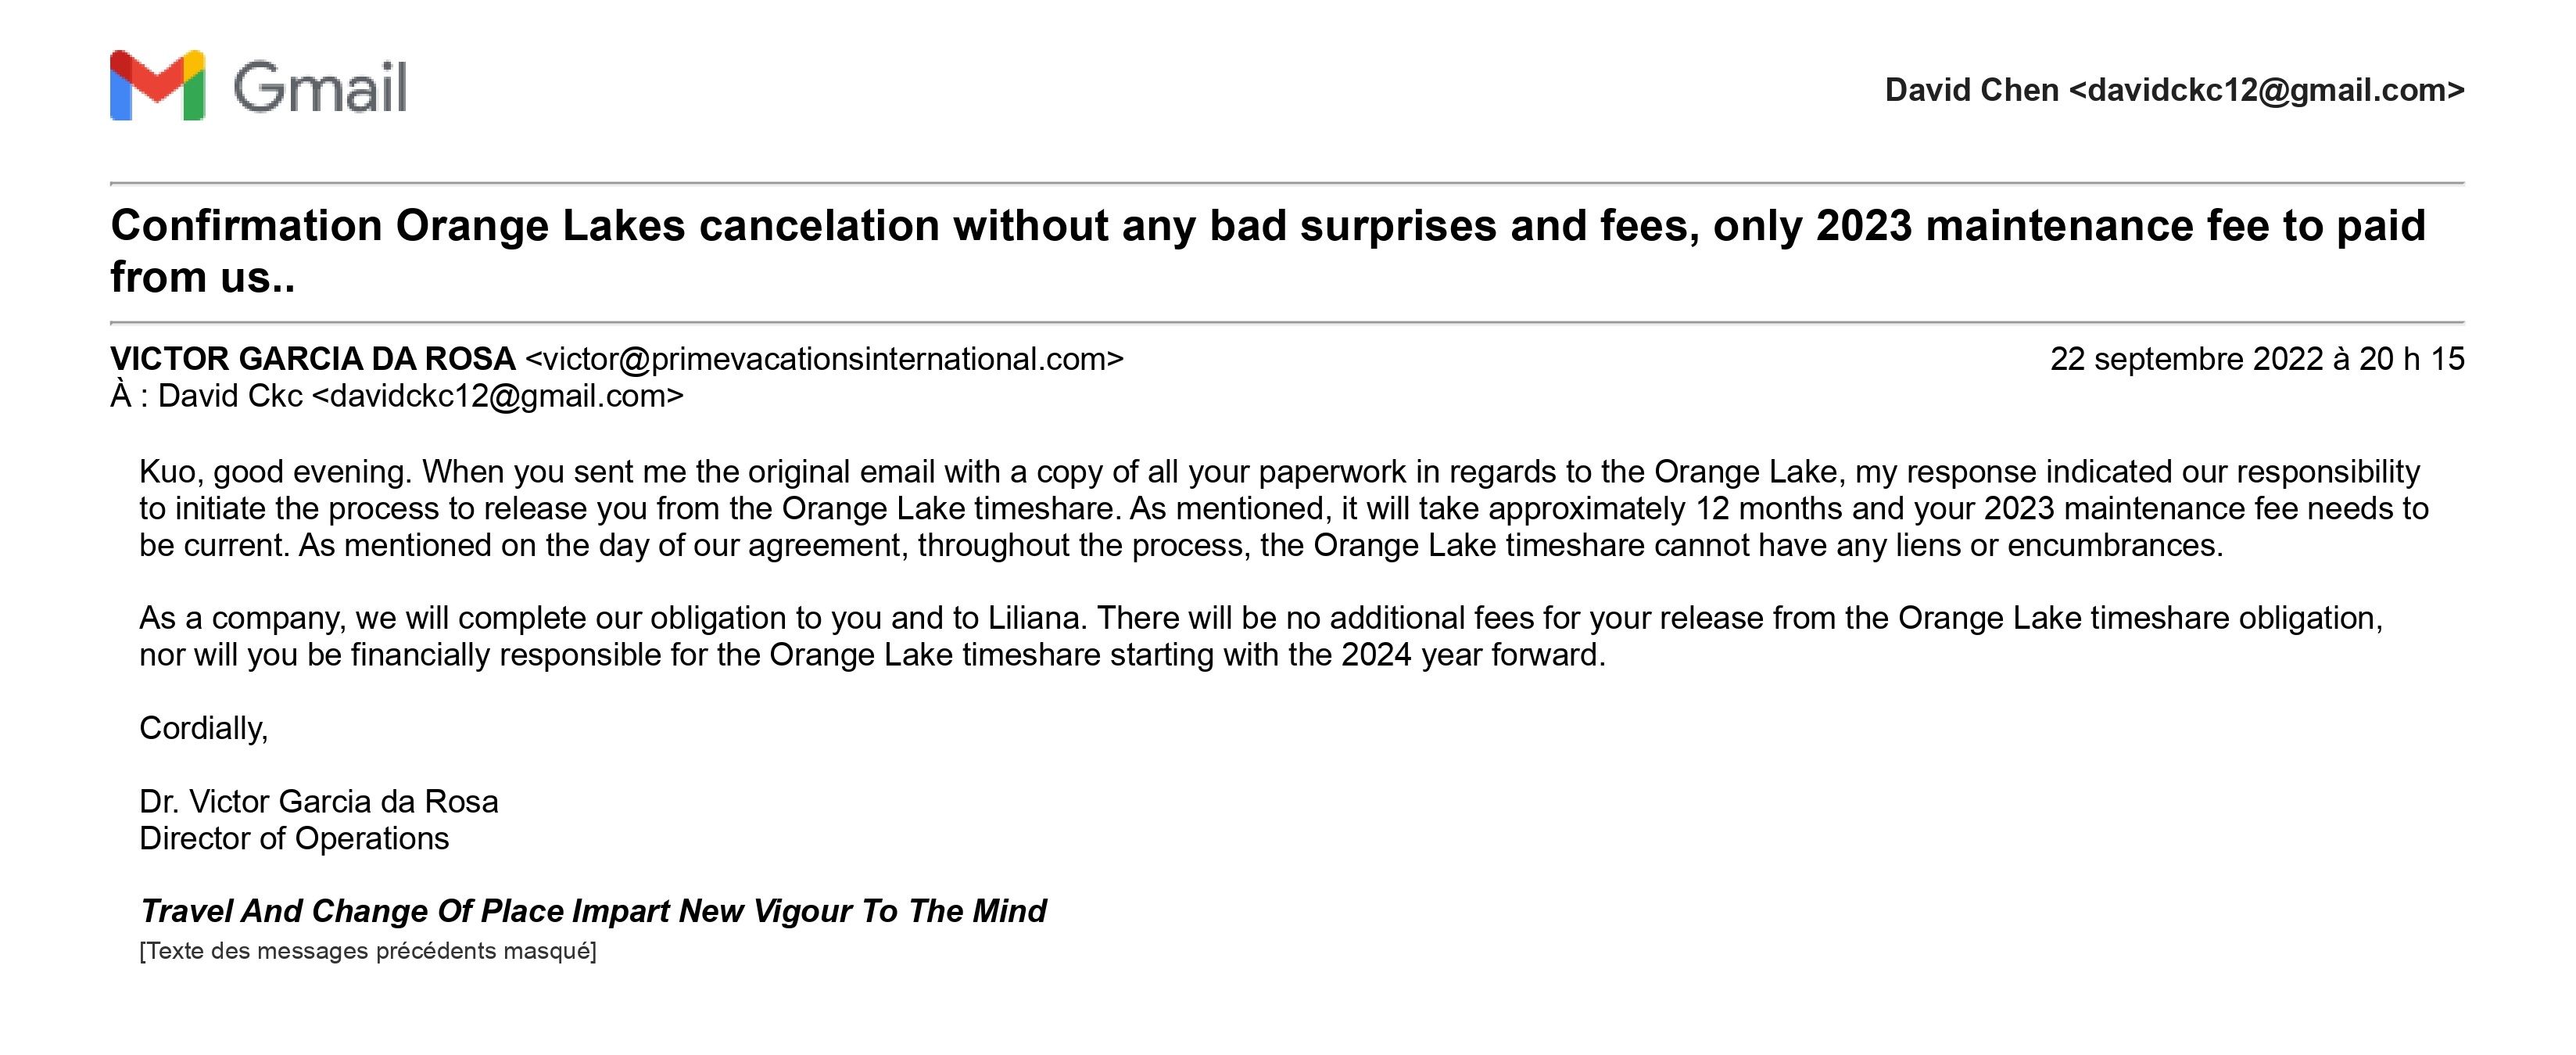 G - Promised will Release from Orange timeshare 9-